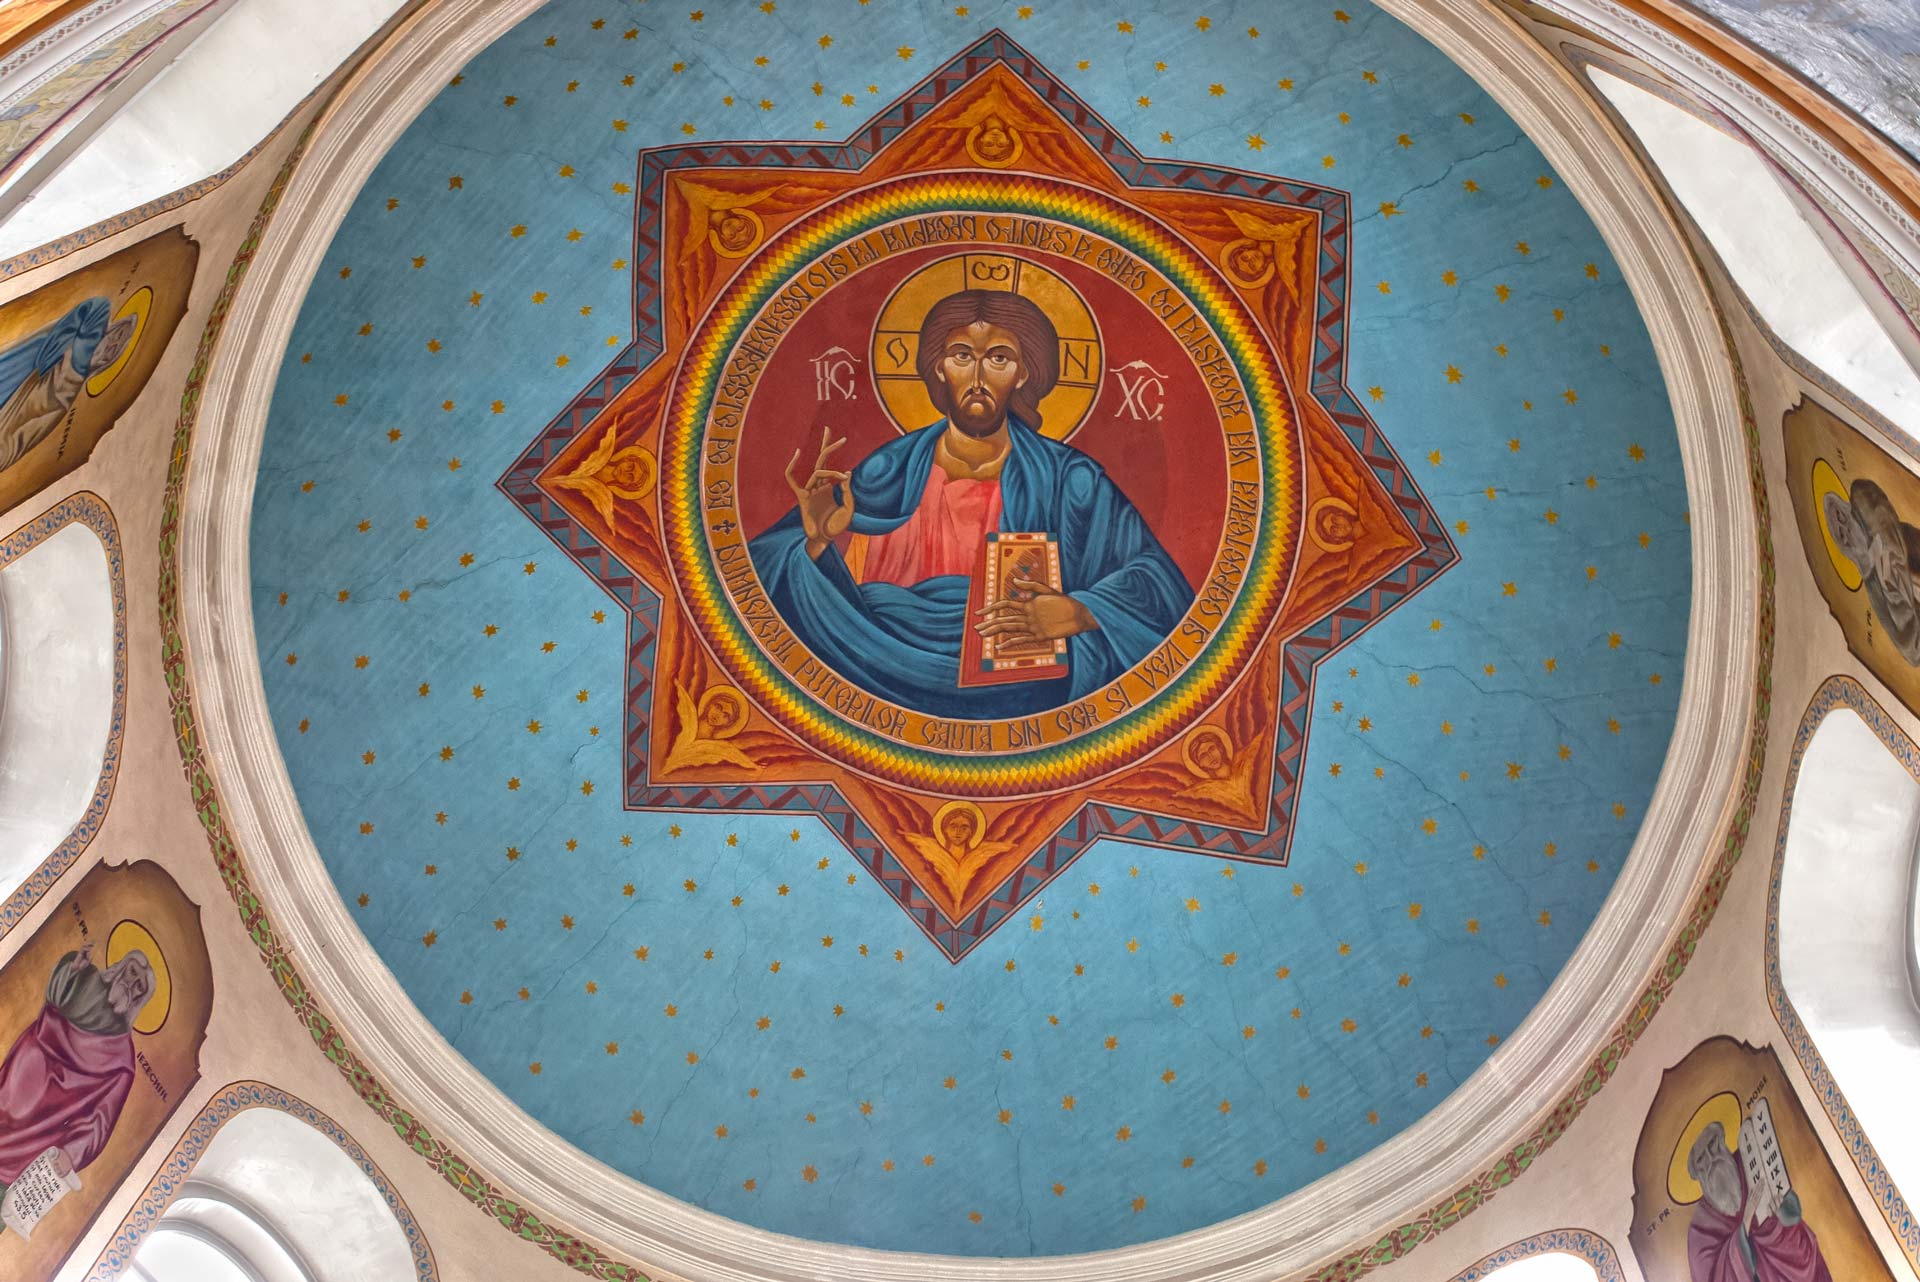 Religious fresco of Jesus Christ painted on ceiling of orthodox church of Saint Martyr Haralambie in Chisinau city, Moldova